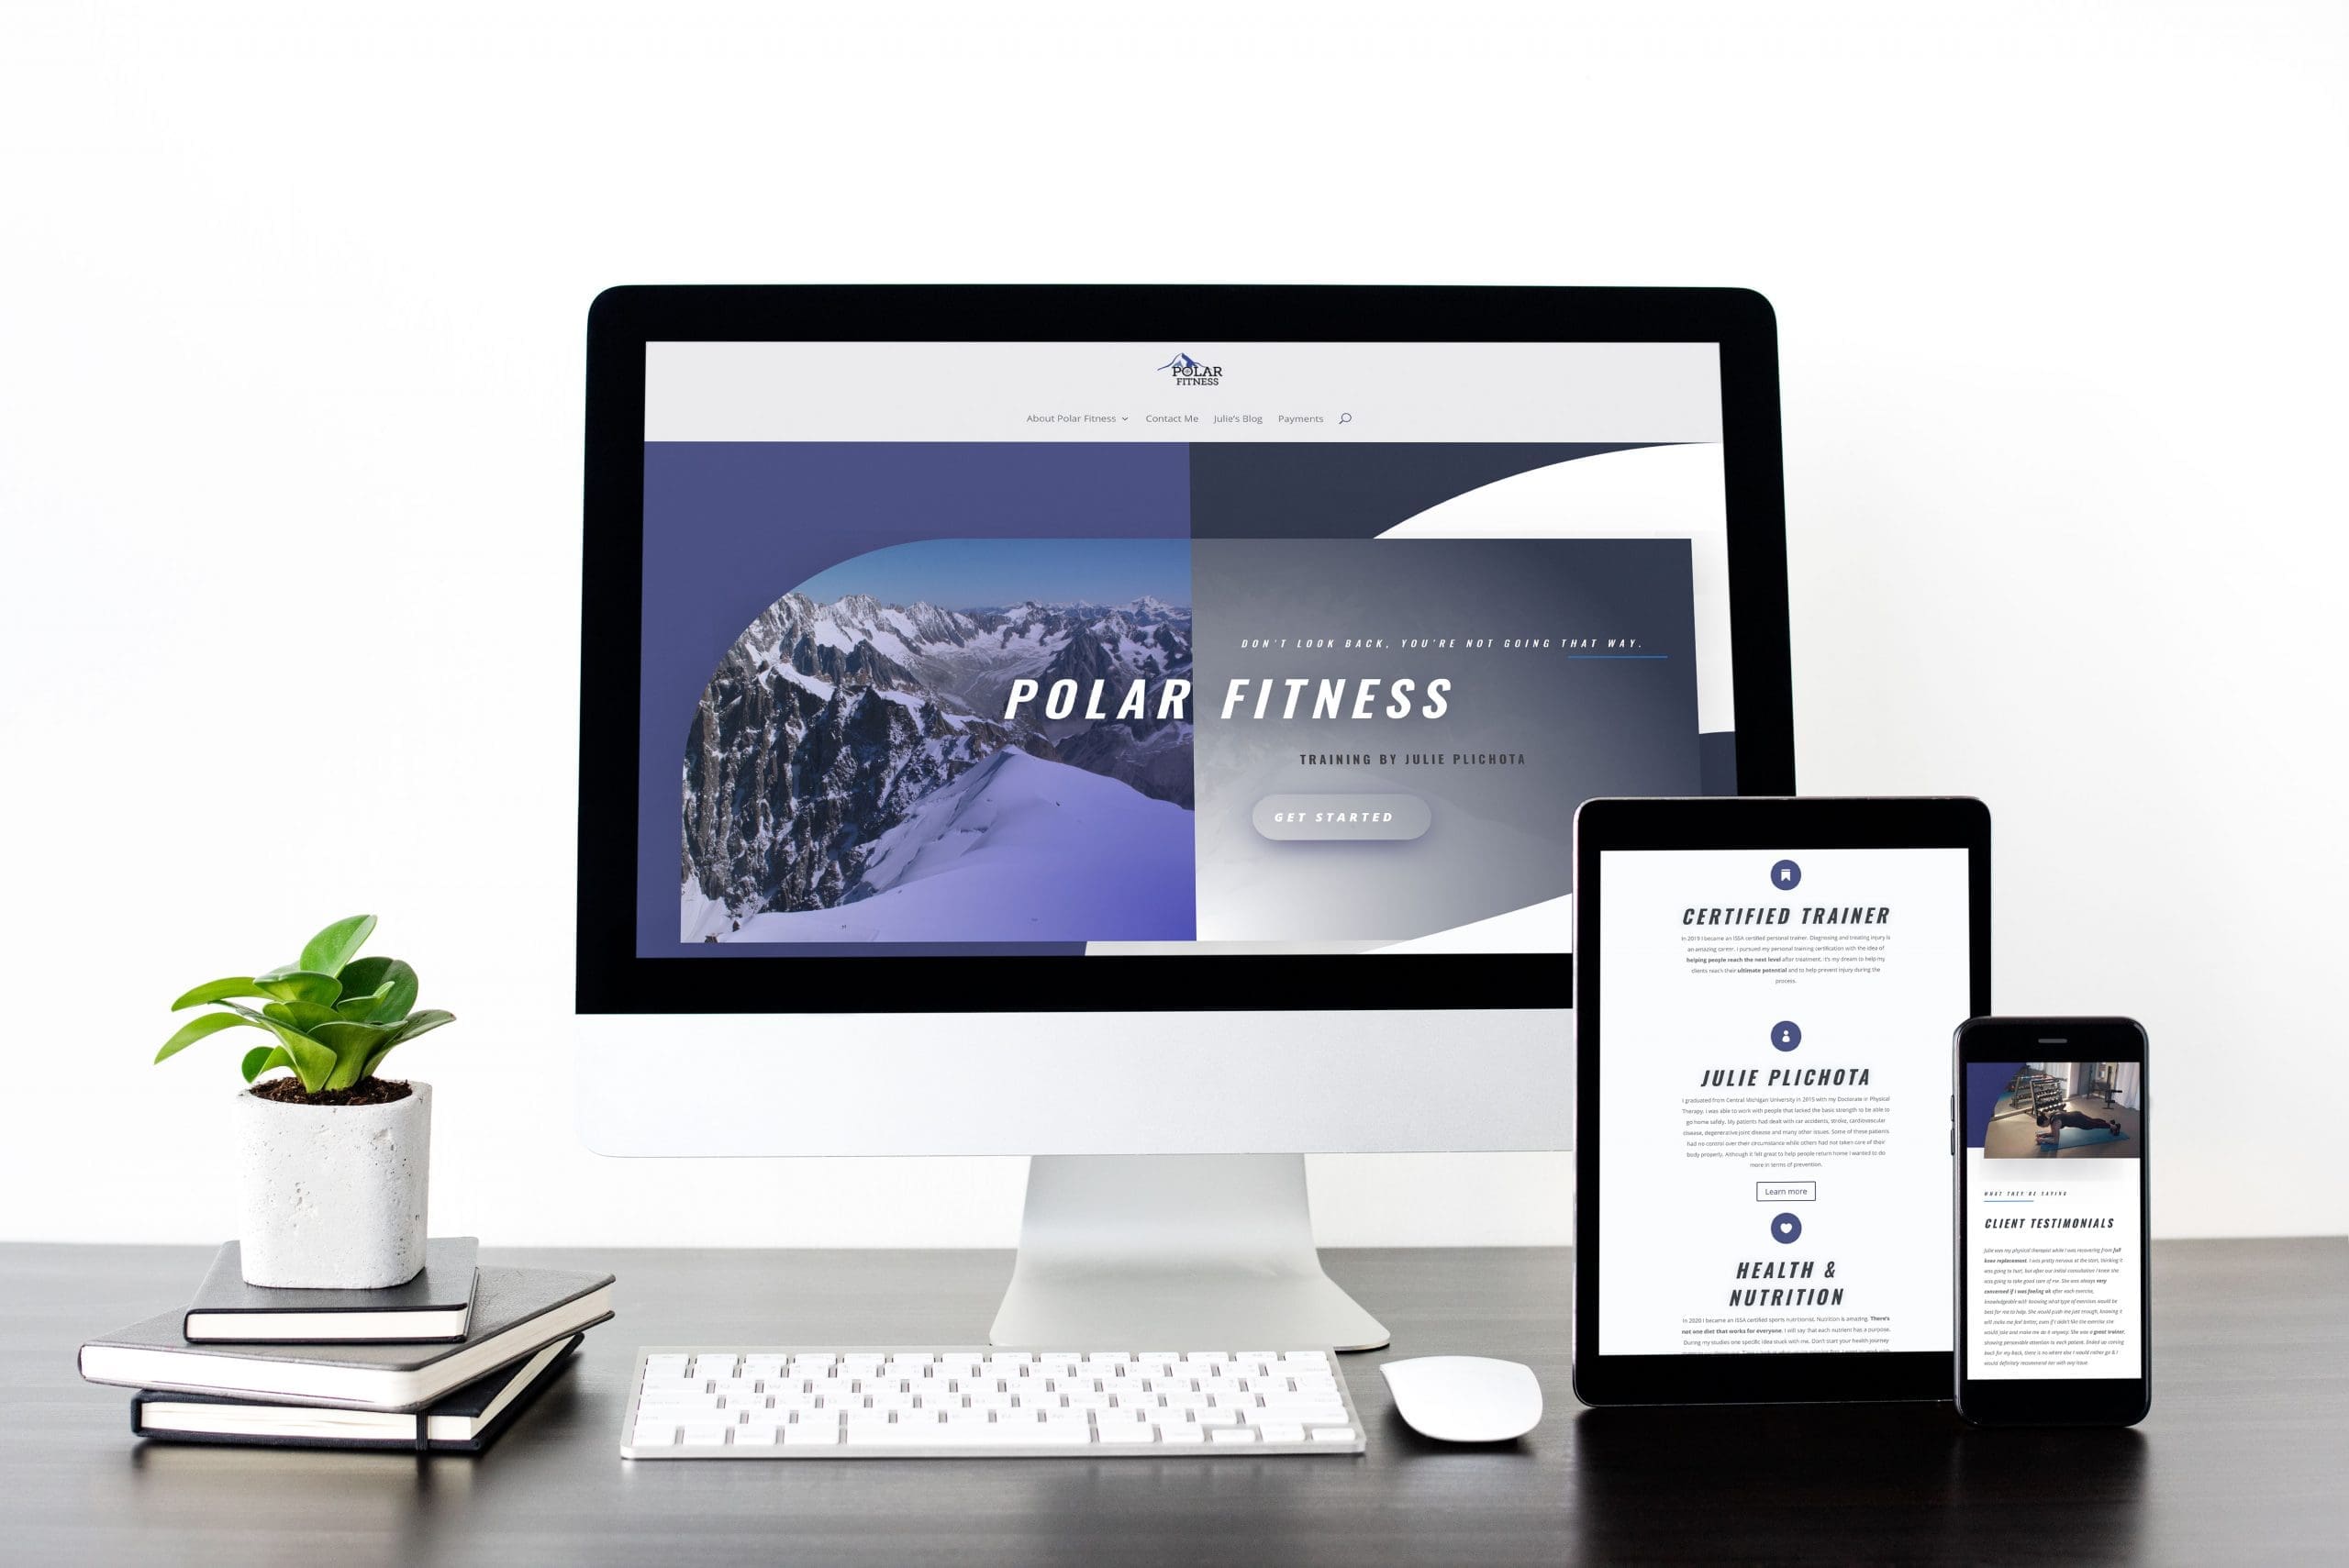 Polar Physical Therapy and Fitness - 2020 Website Mockup 02